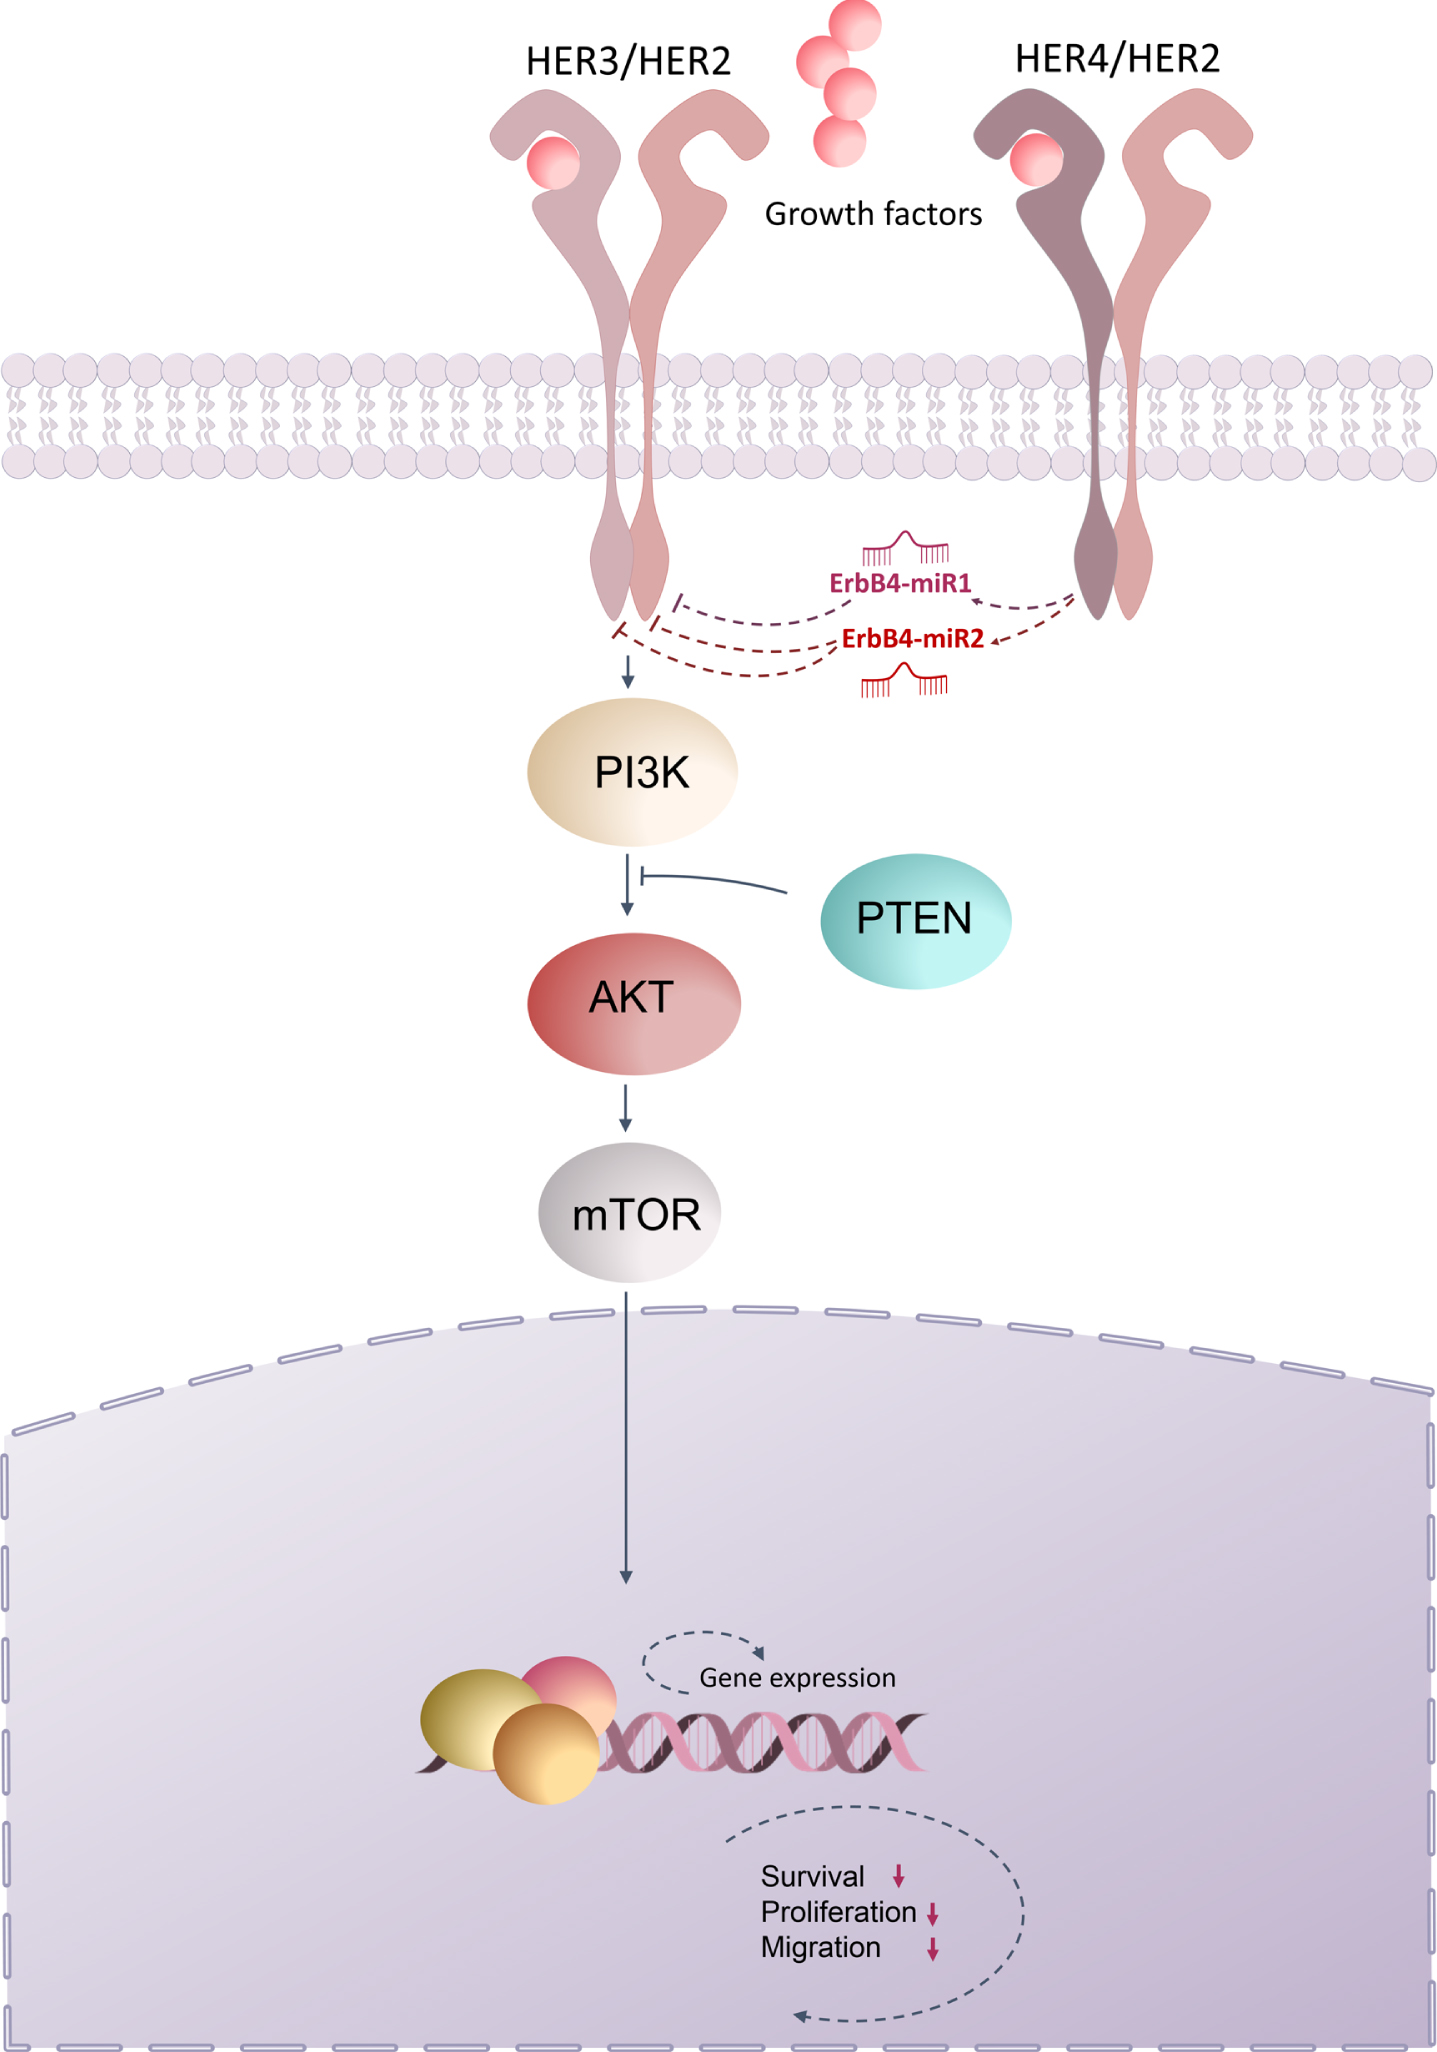 Schematic representation of ErbB/PI3K regulation by ErbB4-miR1/2. The present study demonstrated that ErbB4-miR1/2, are novel miRNAs encoded from the ErbB4 gene locus and that up-regulation of ErbB4-miR1/2 could repress the expression of ErbB2 (HER2) and ErbB3 (HER3), thus suppressing the PI3K signaling pathway, which ultimately leads to inhibition of cell proliferation, survival, and migration.